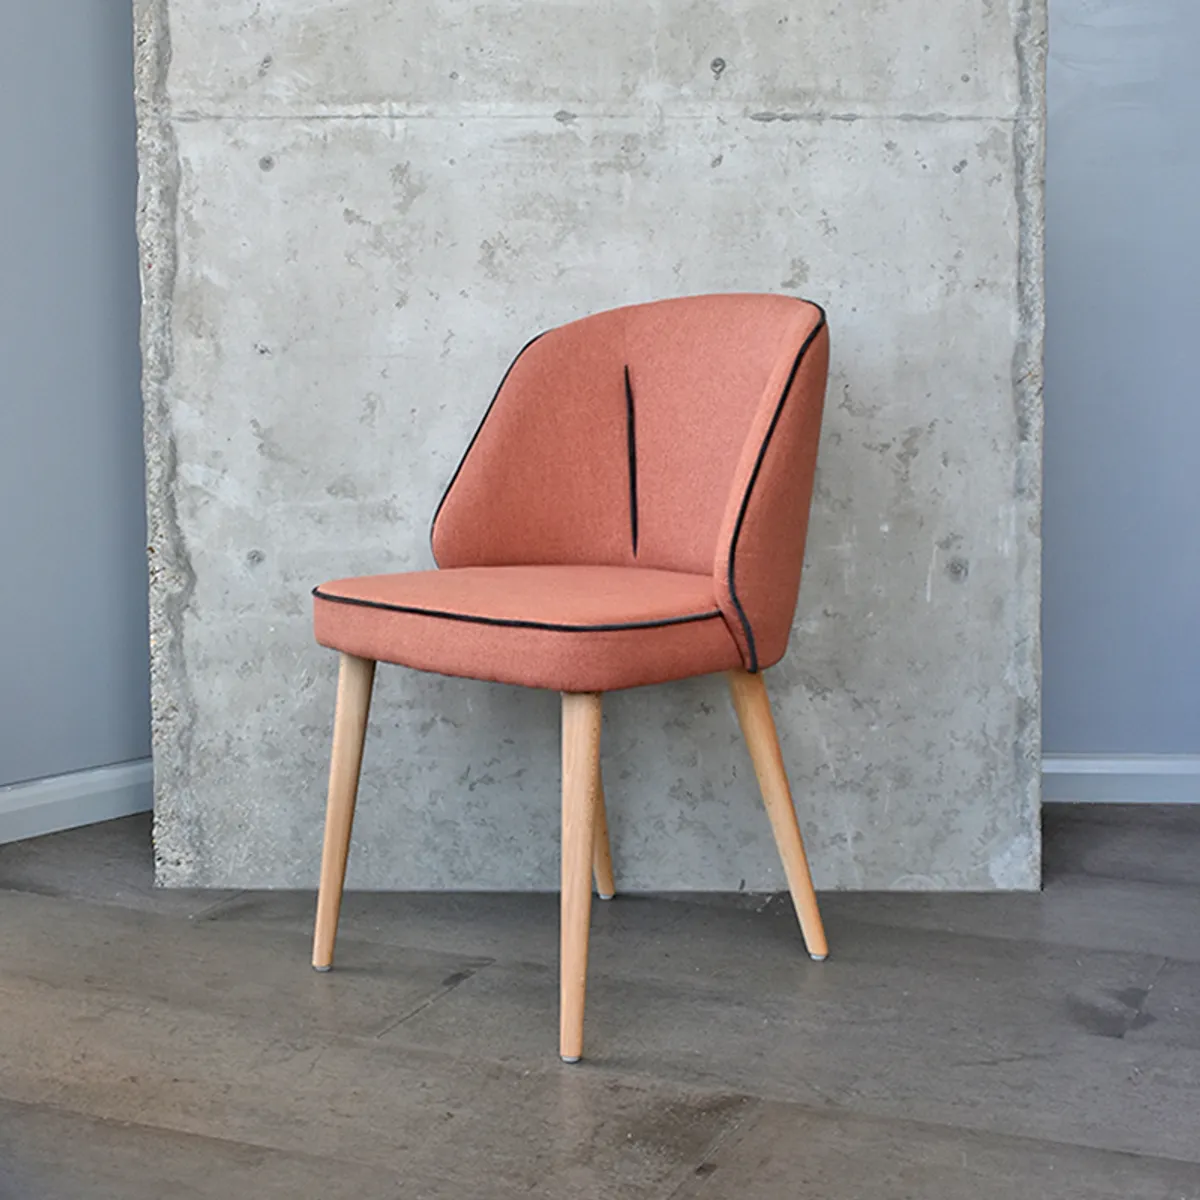 Lissy Chair New Furniture From Milan 2019 By Inside Out Contracts 030